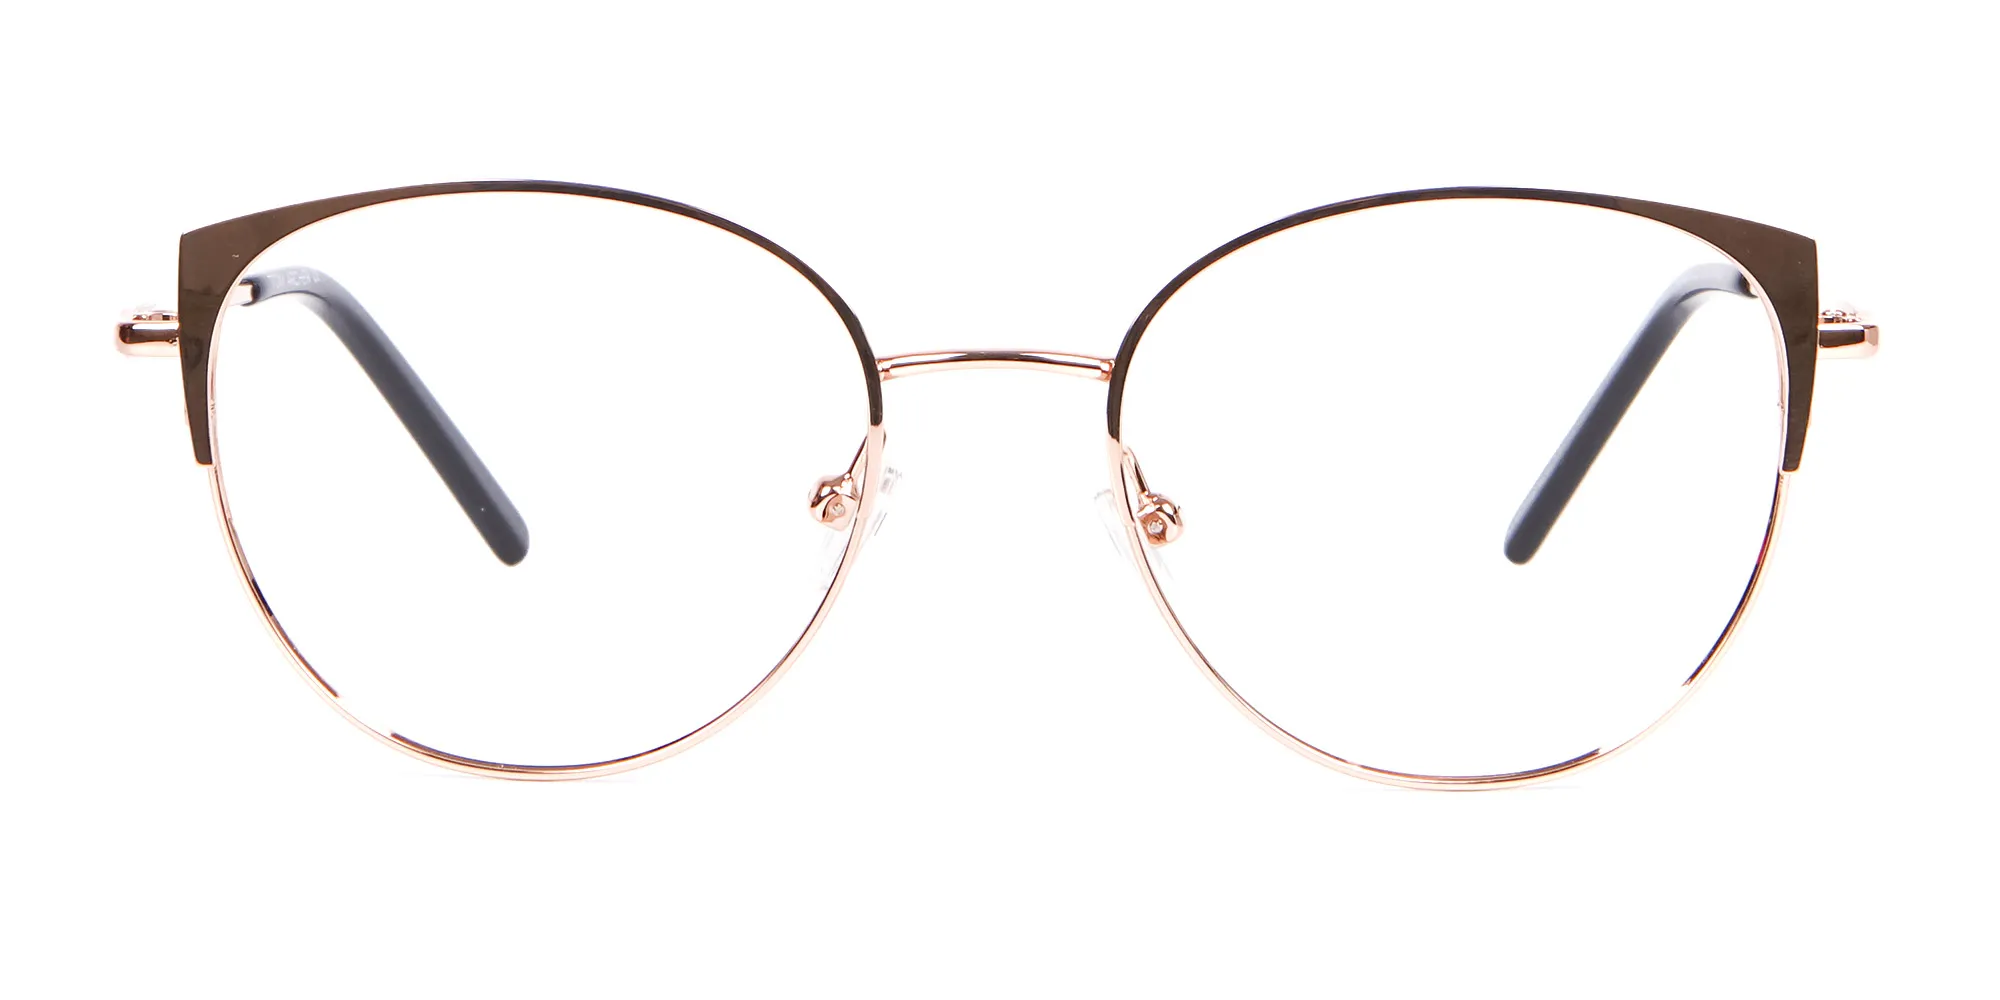 Classic Textured Glasses in Rose-Gold - 2